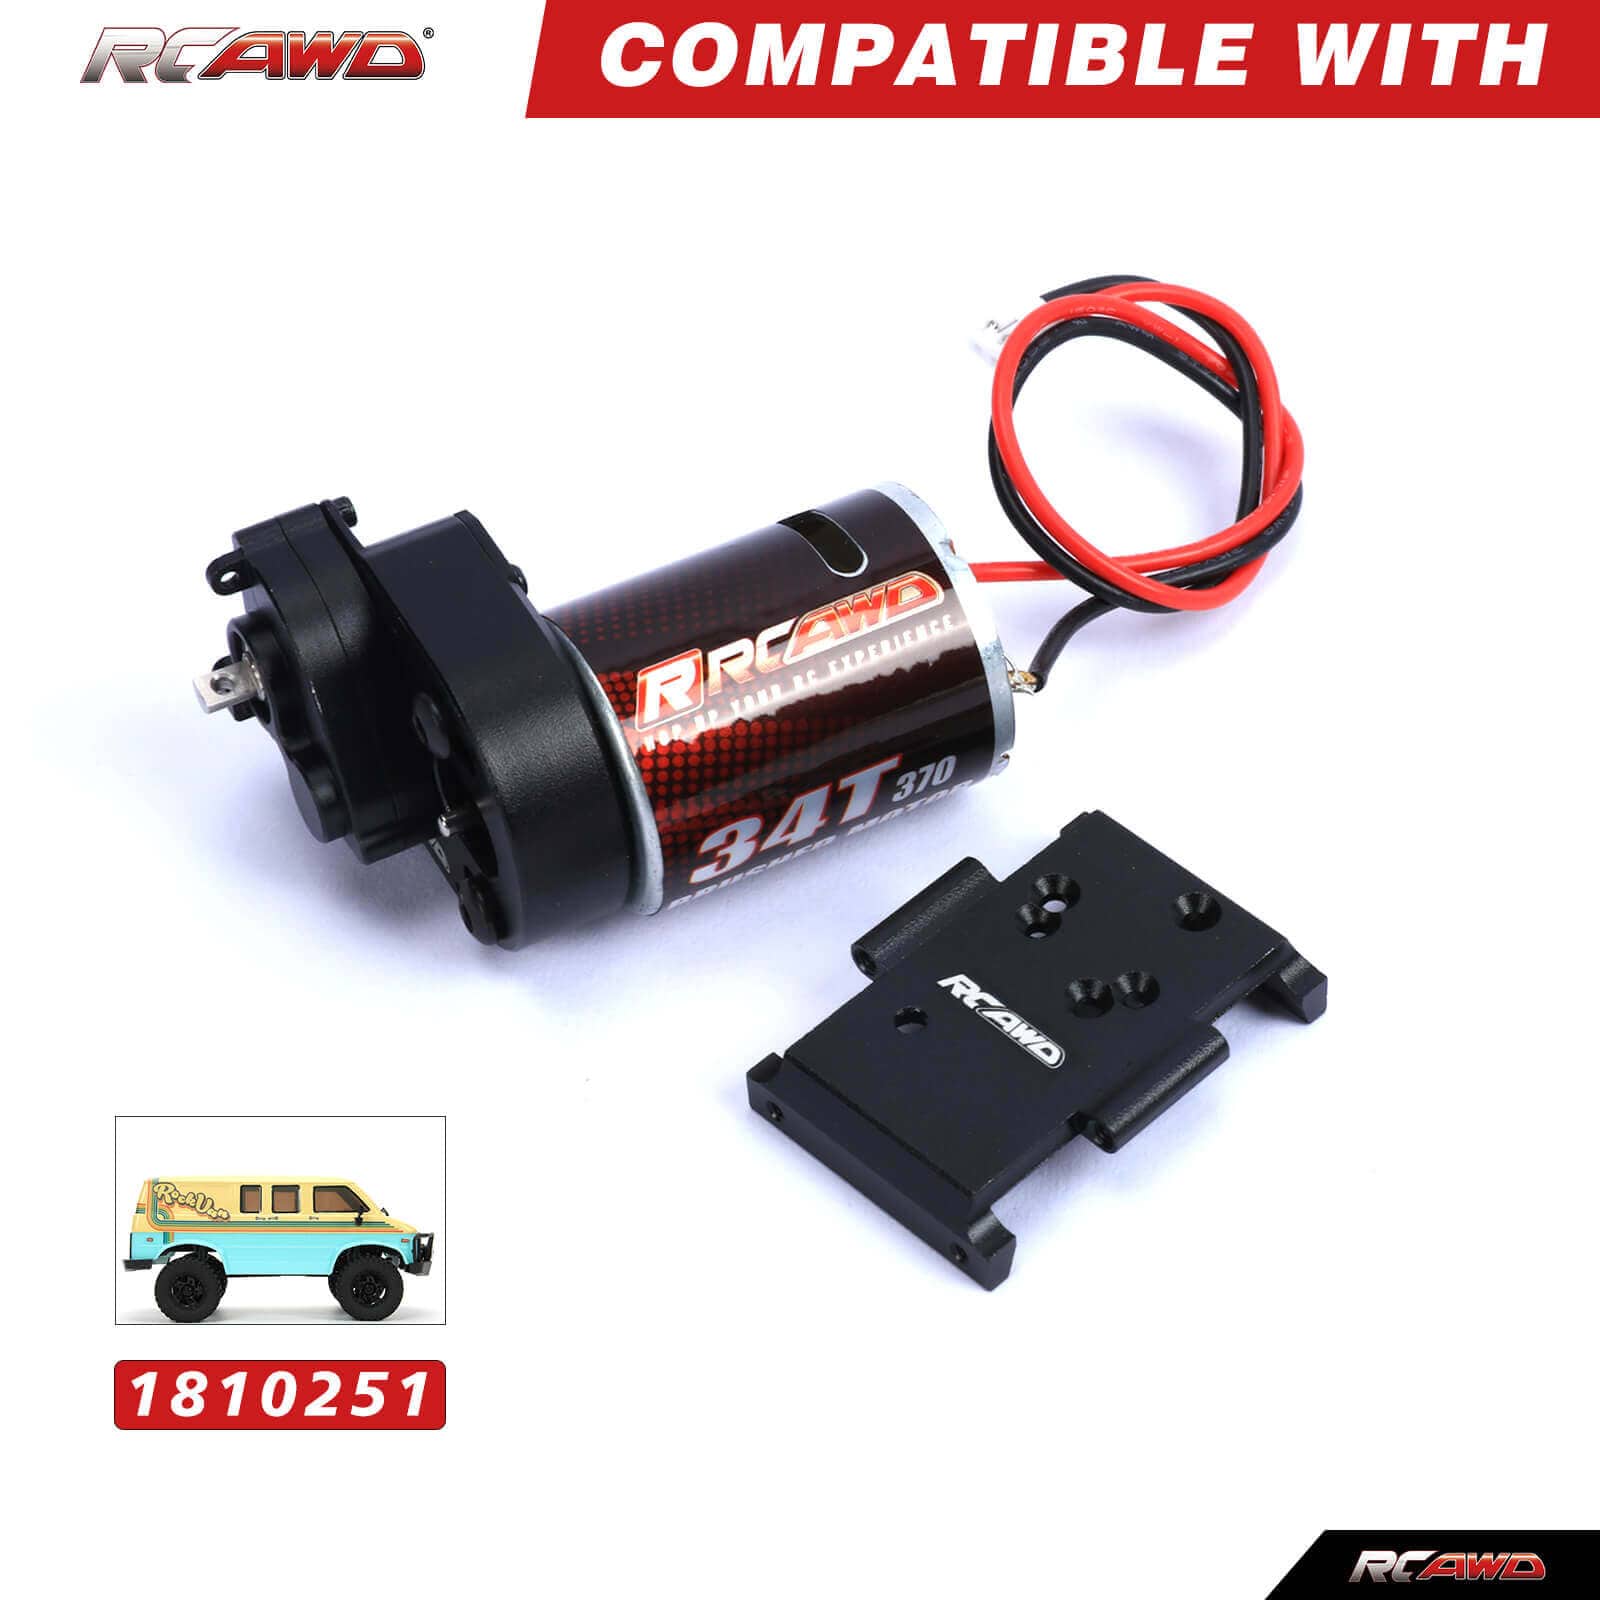 RCAWD HobbyPlus CR18 Upgrades 370 Motor 34T Metal Gearbox Combo Transmission Full Set 240300 - RCAWD